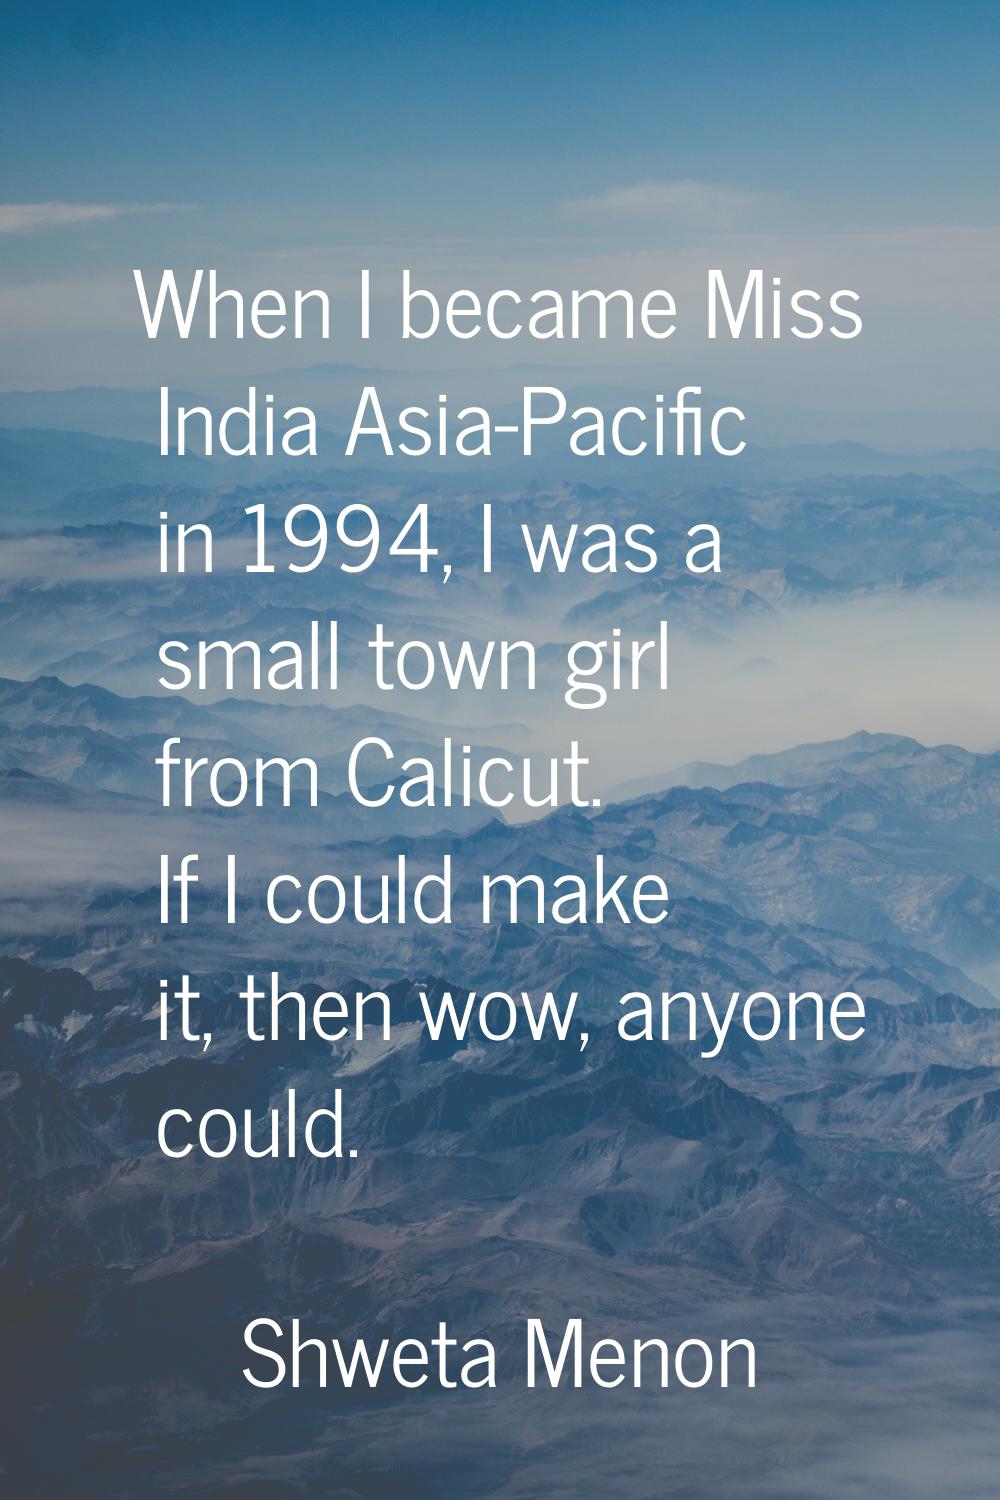 When I became Miss India Asia-Pacific in 1994, I was a small town girl from Calicut. If I could mak